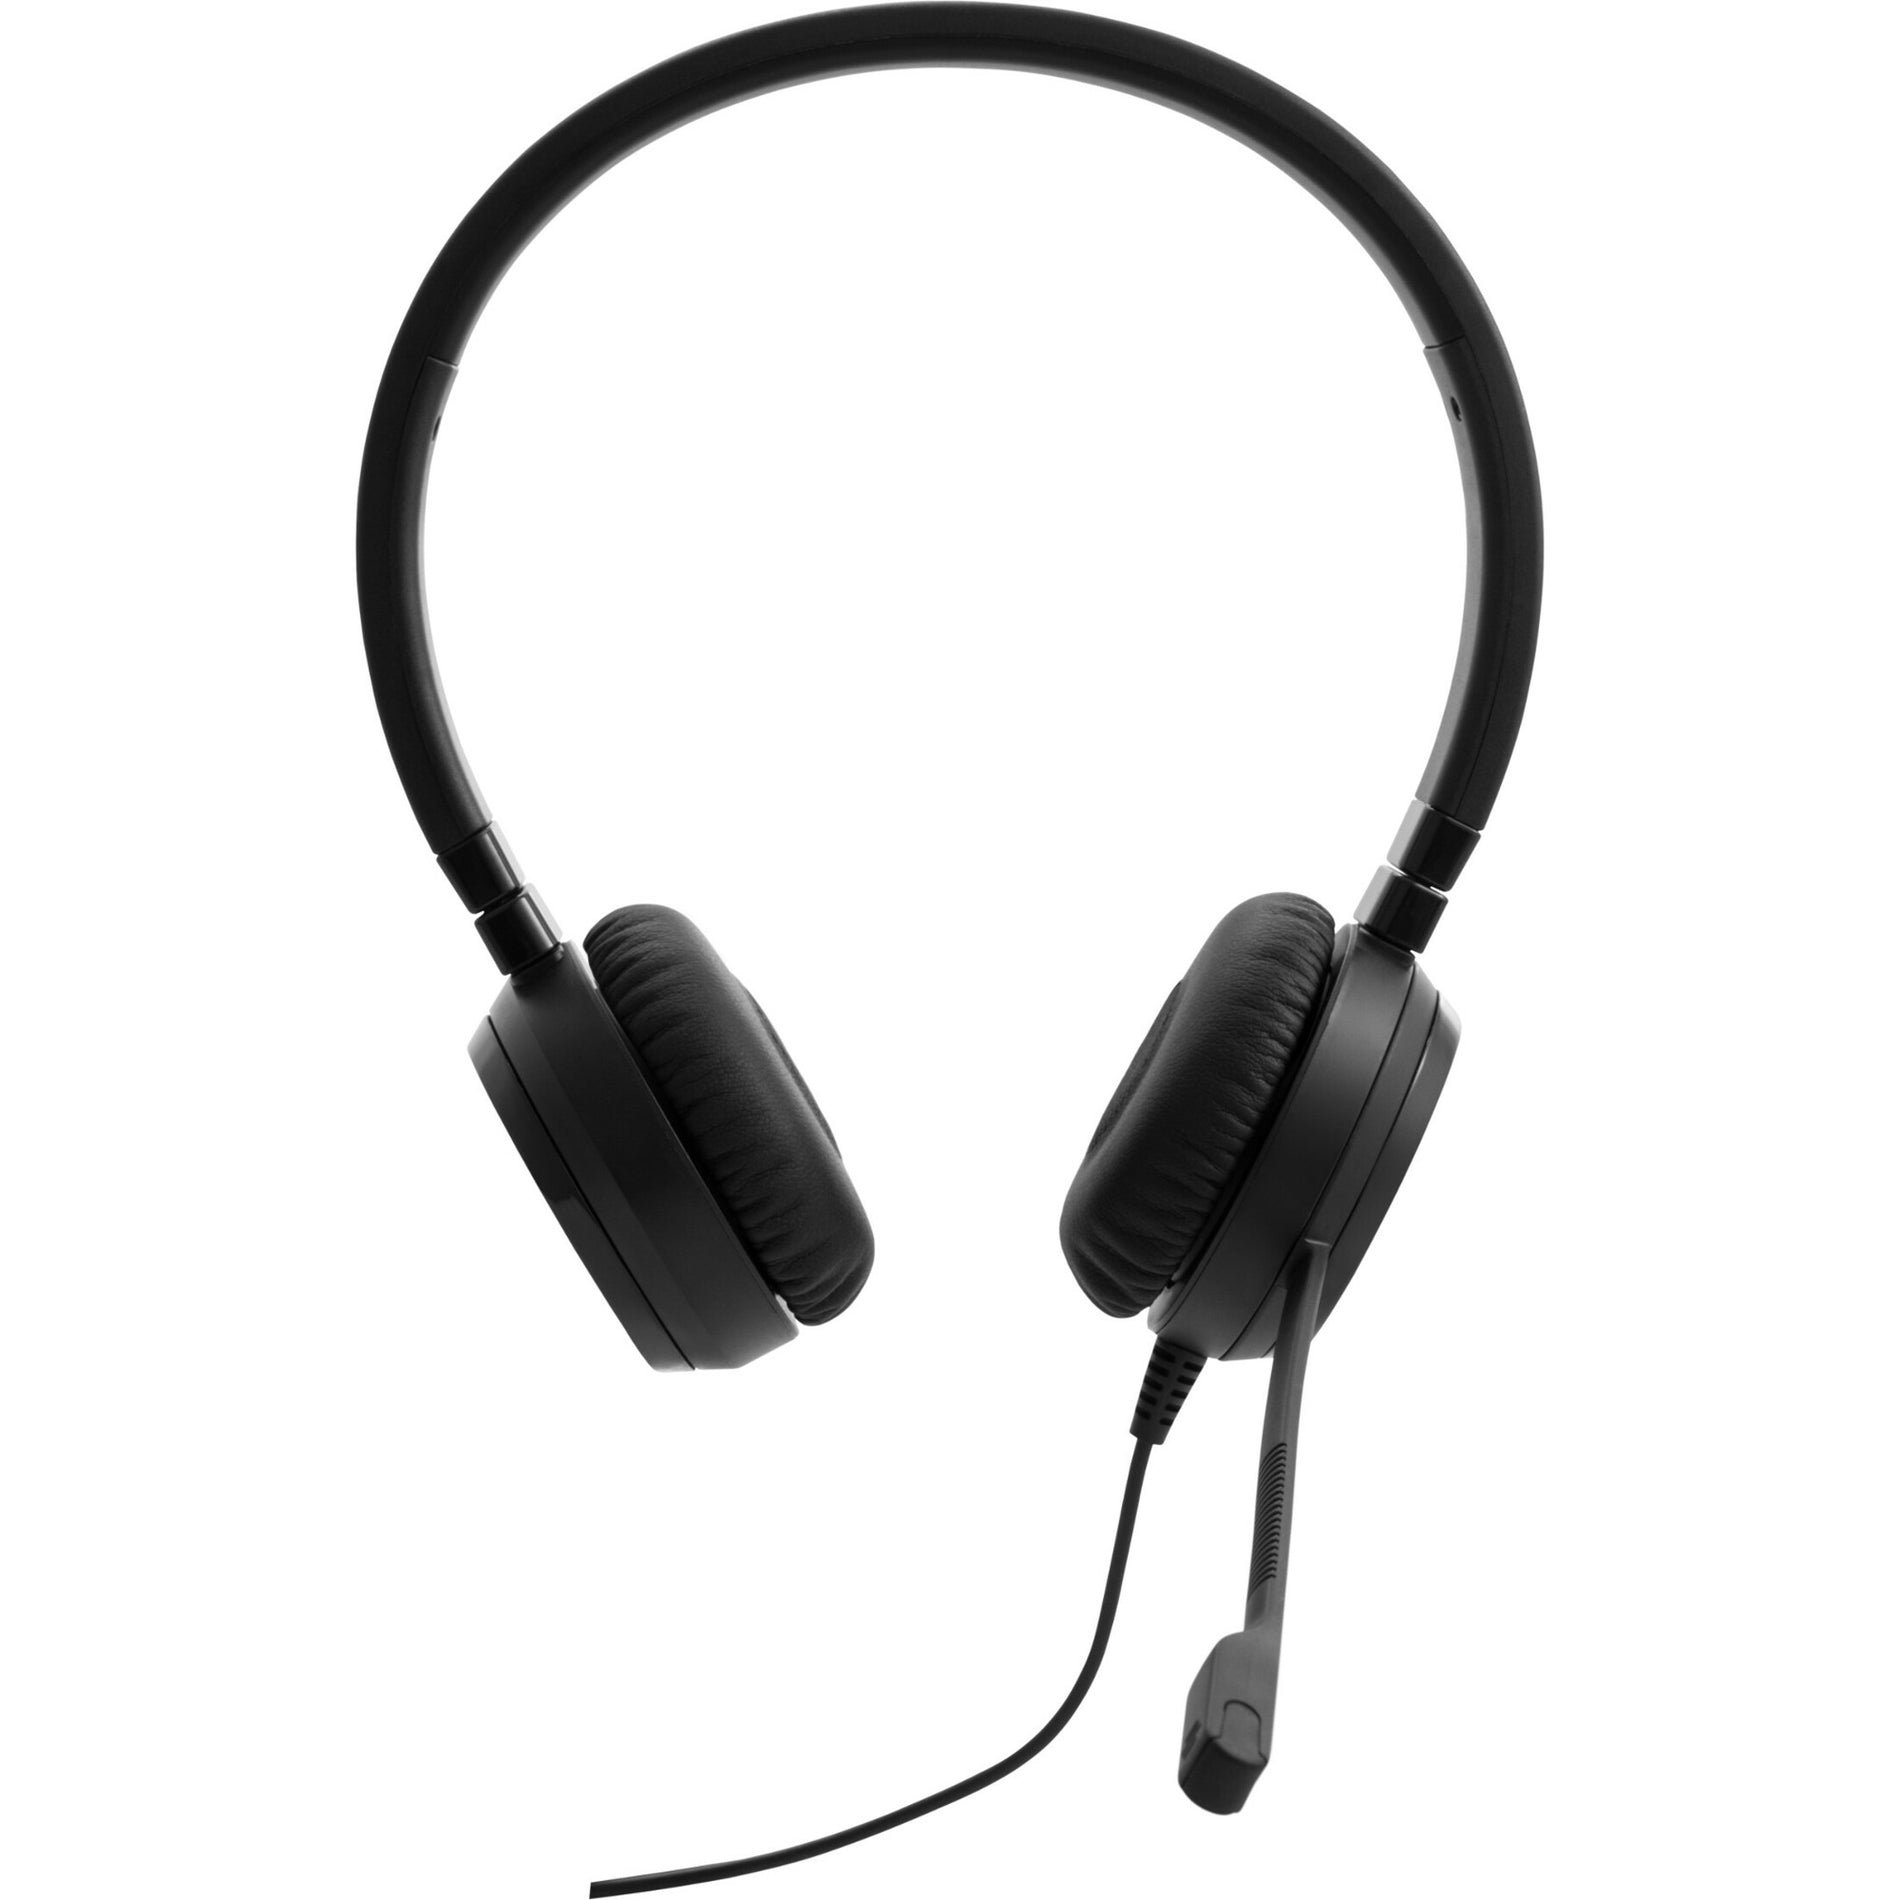 Lenovo 4XD0S92991 Pro Wired Stereo VOIP Headset, Over-the-head, Binaural, 1 Year Warranty